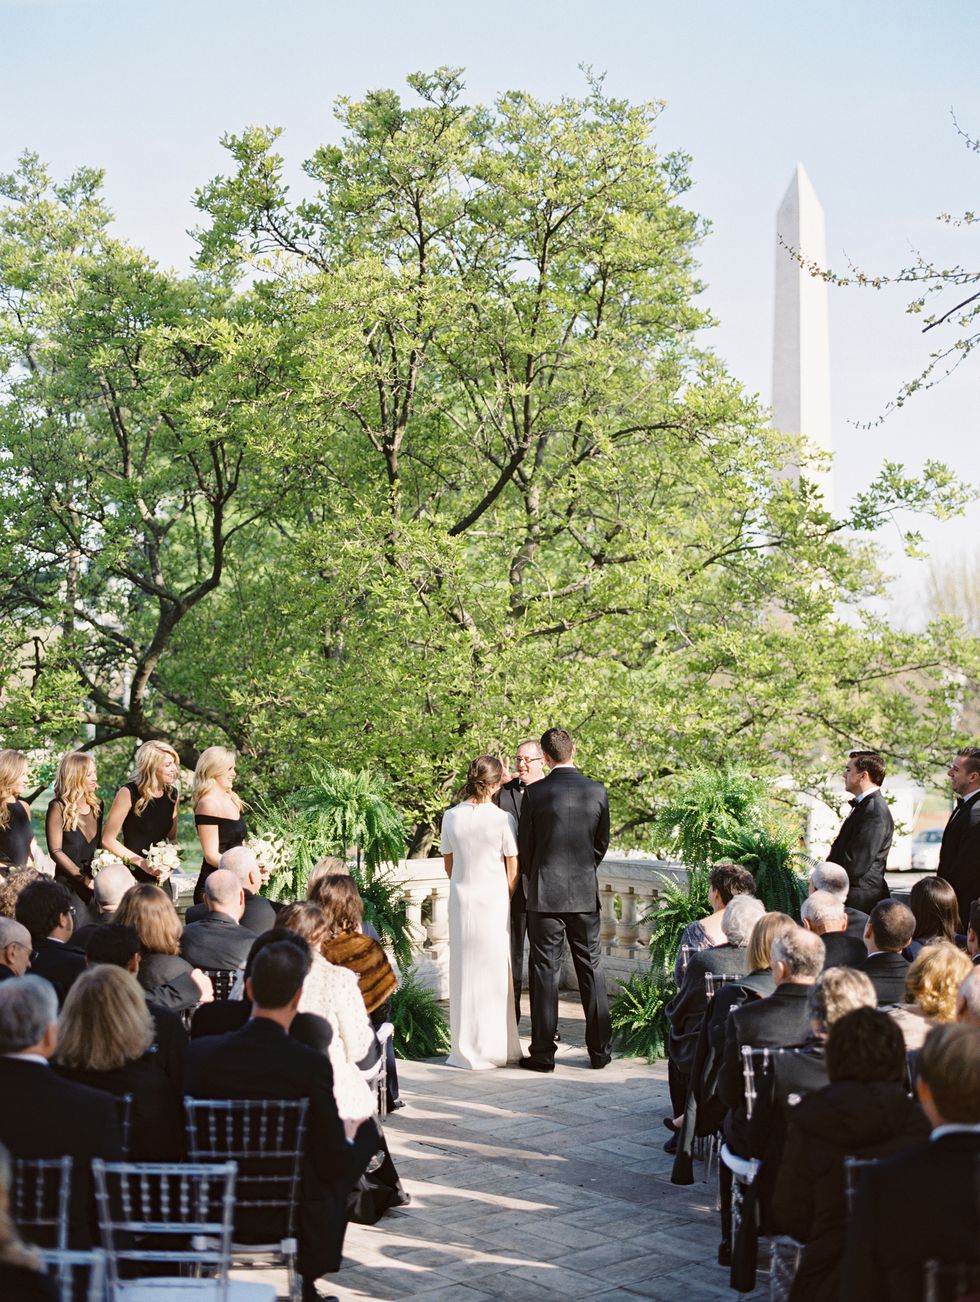 <p>During the sunlit service, Arielle and Matt exchanged traditional vows. </p>